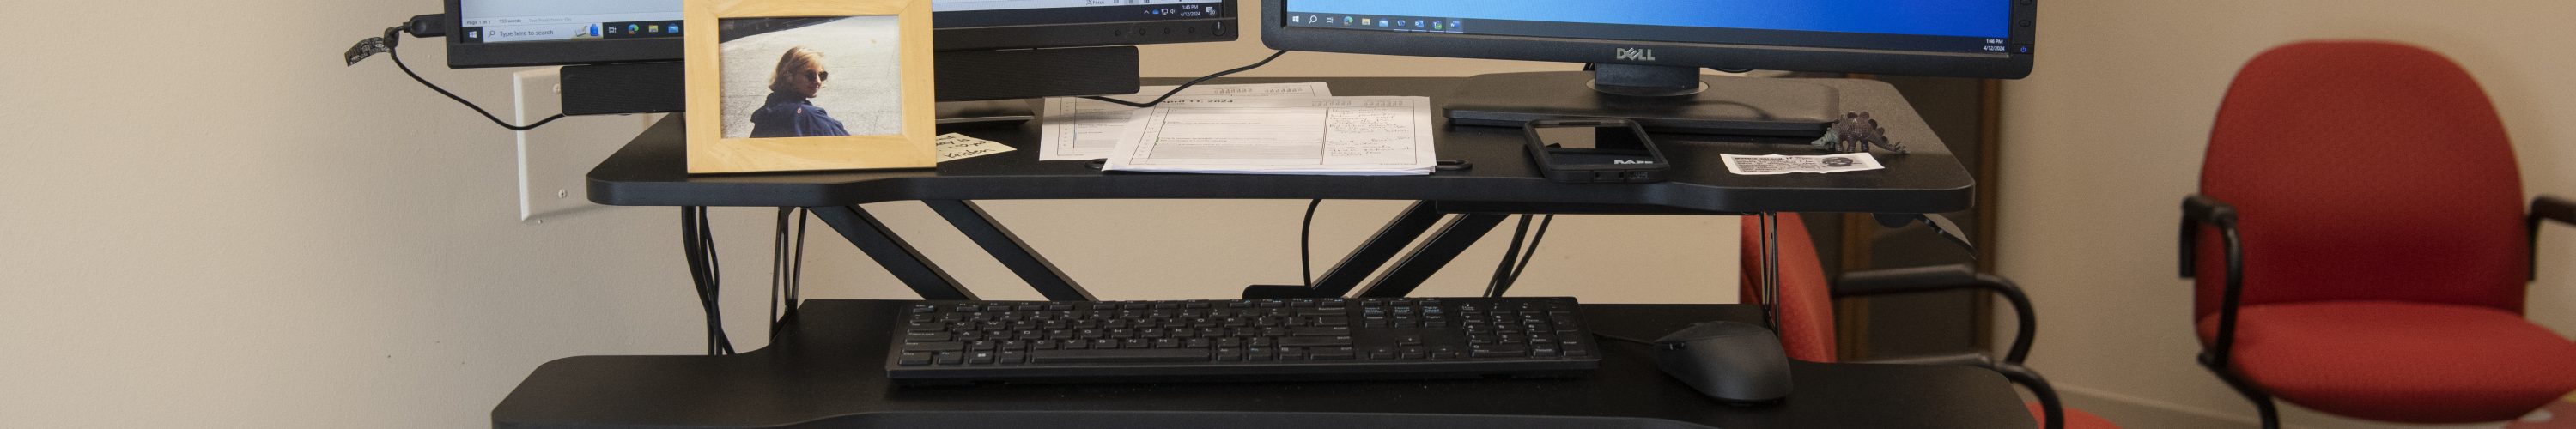 A desk with a computer on it